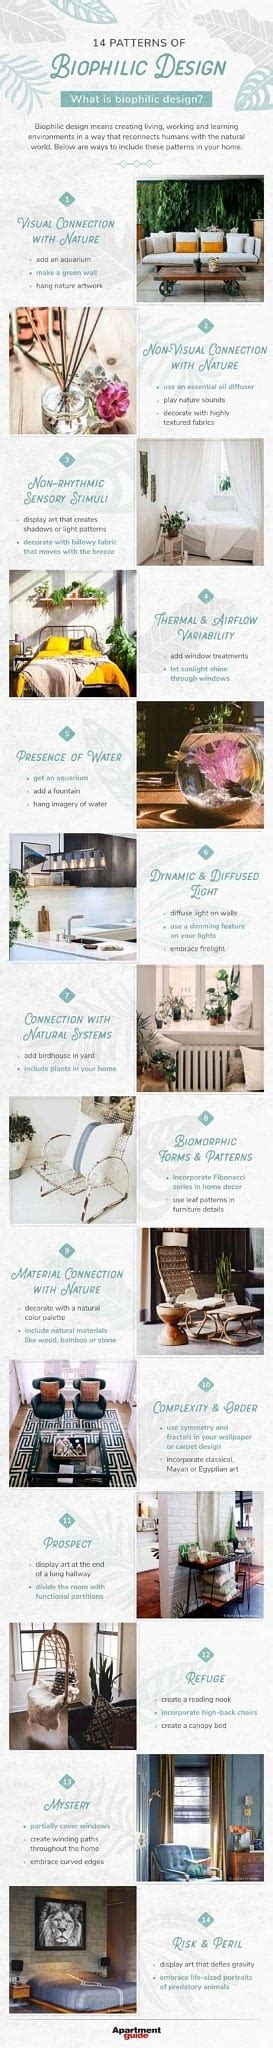 14 Patterns Of Biophilic Design Gorgeous Infographic Self Help Daily